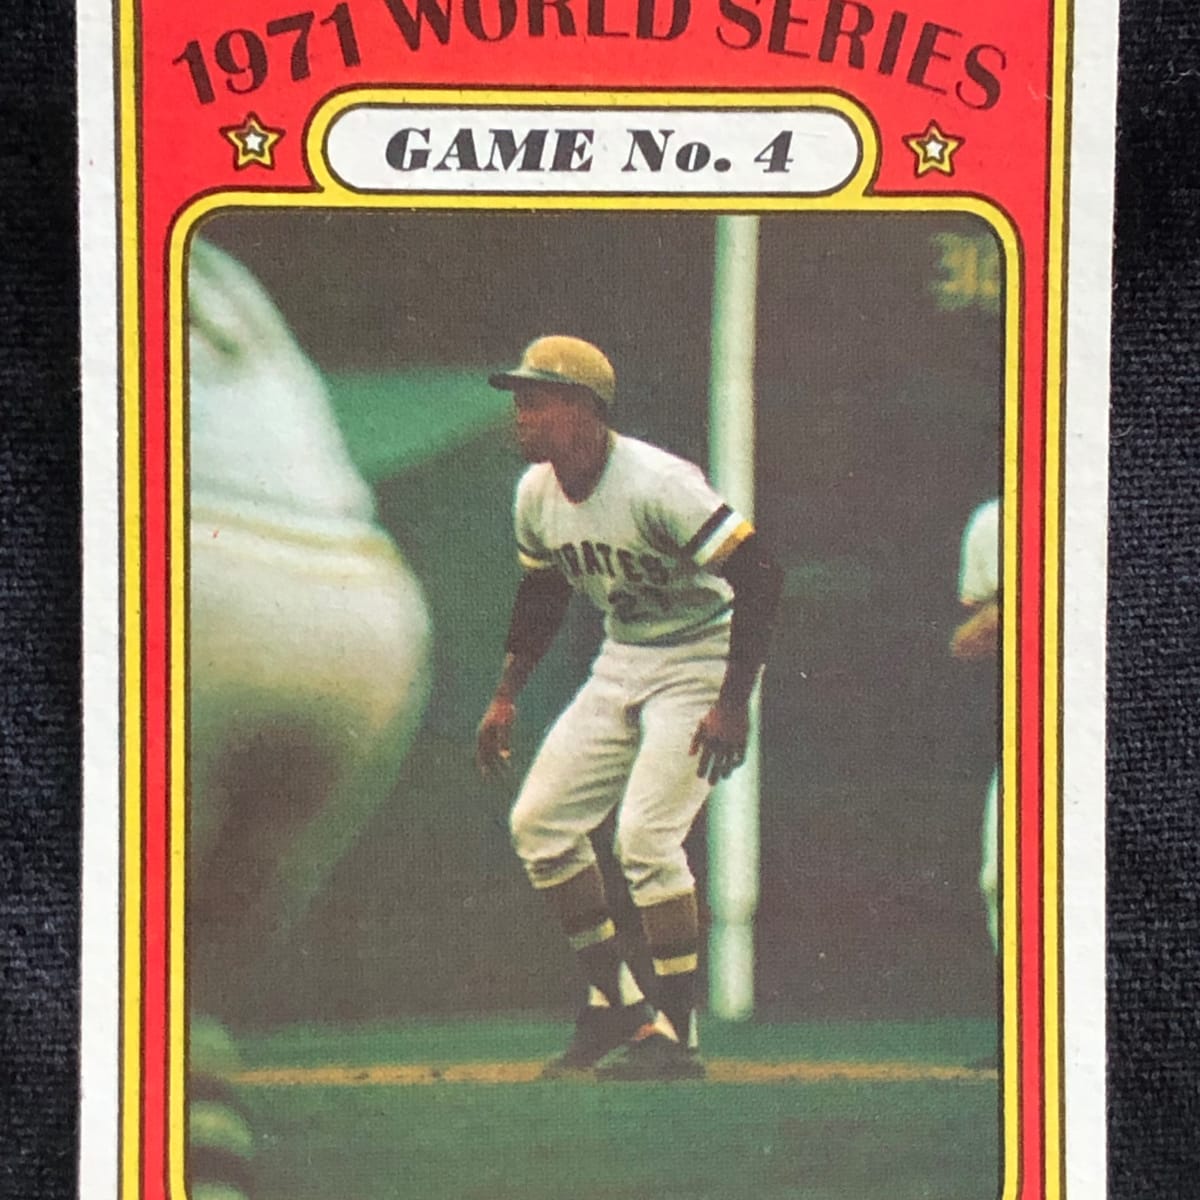 Roberto Clemente STELLAR 1971 World Series! Clemente crushes Orioles to win  MVP 